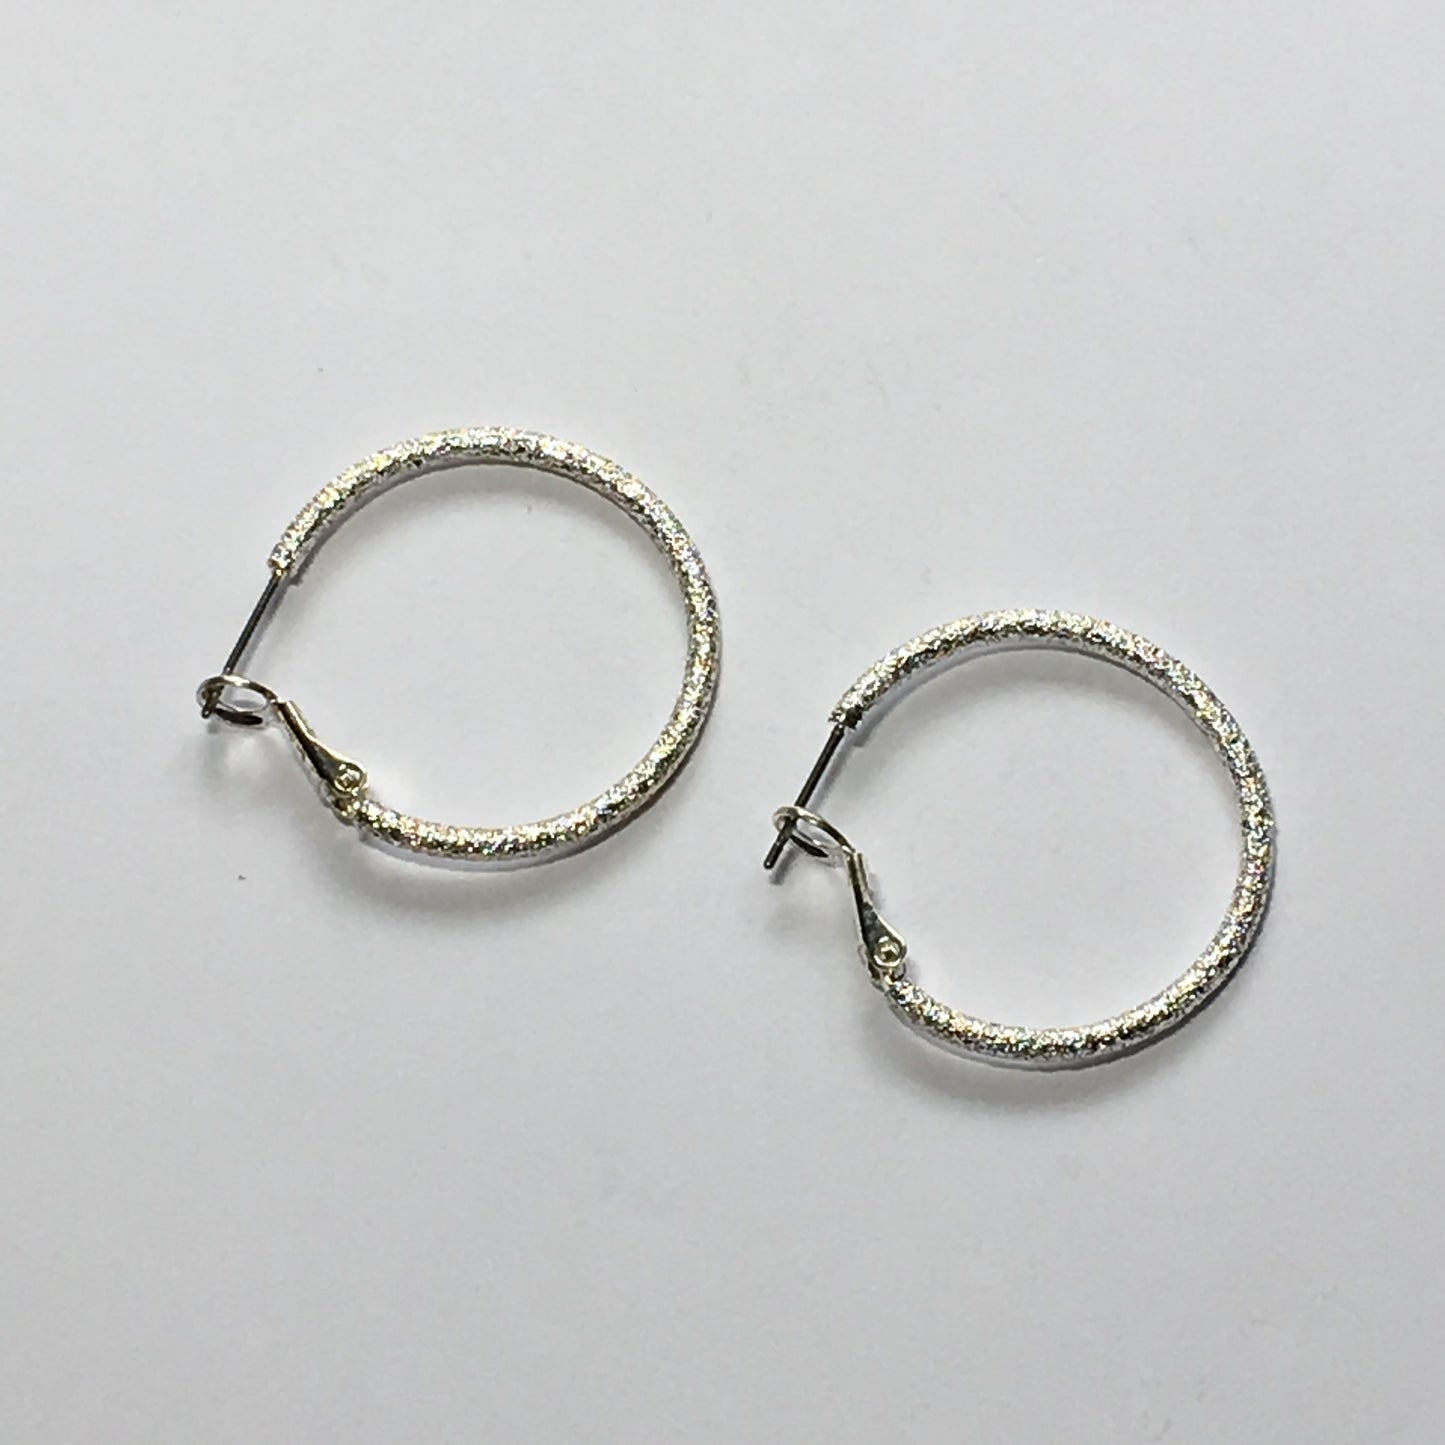 Silver Stardust Lever Back Earring Hoops 30 mm - 1 pair